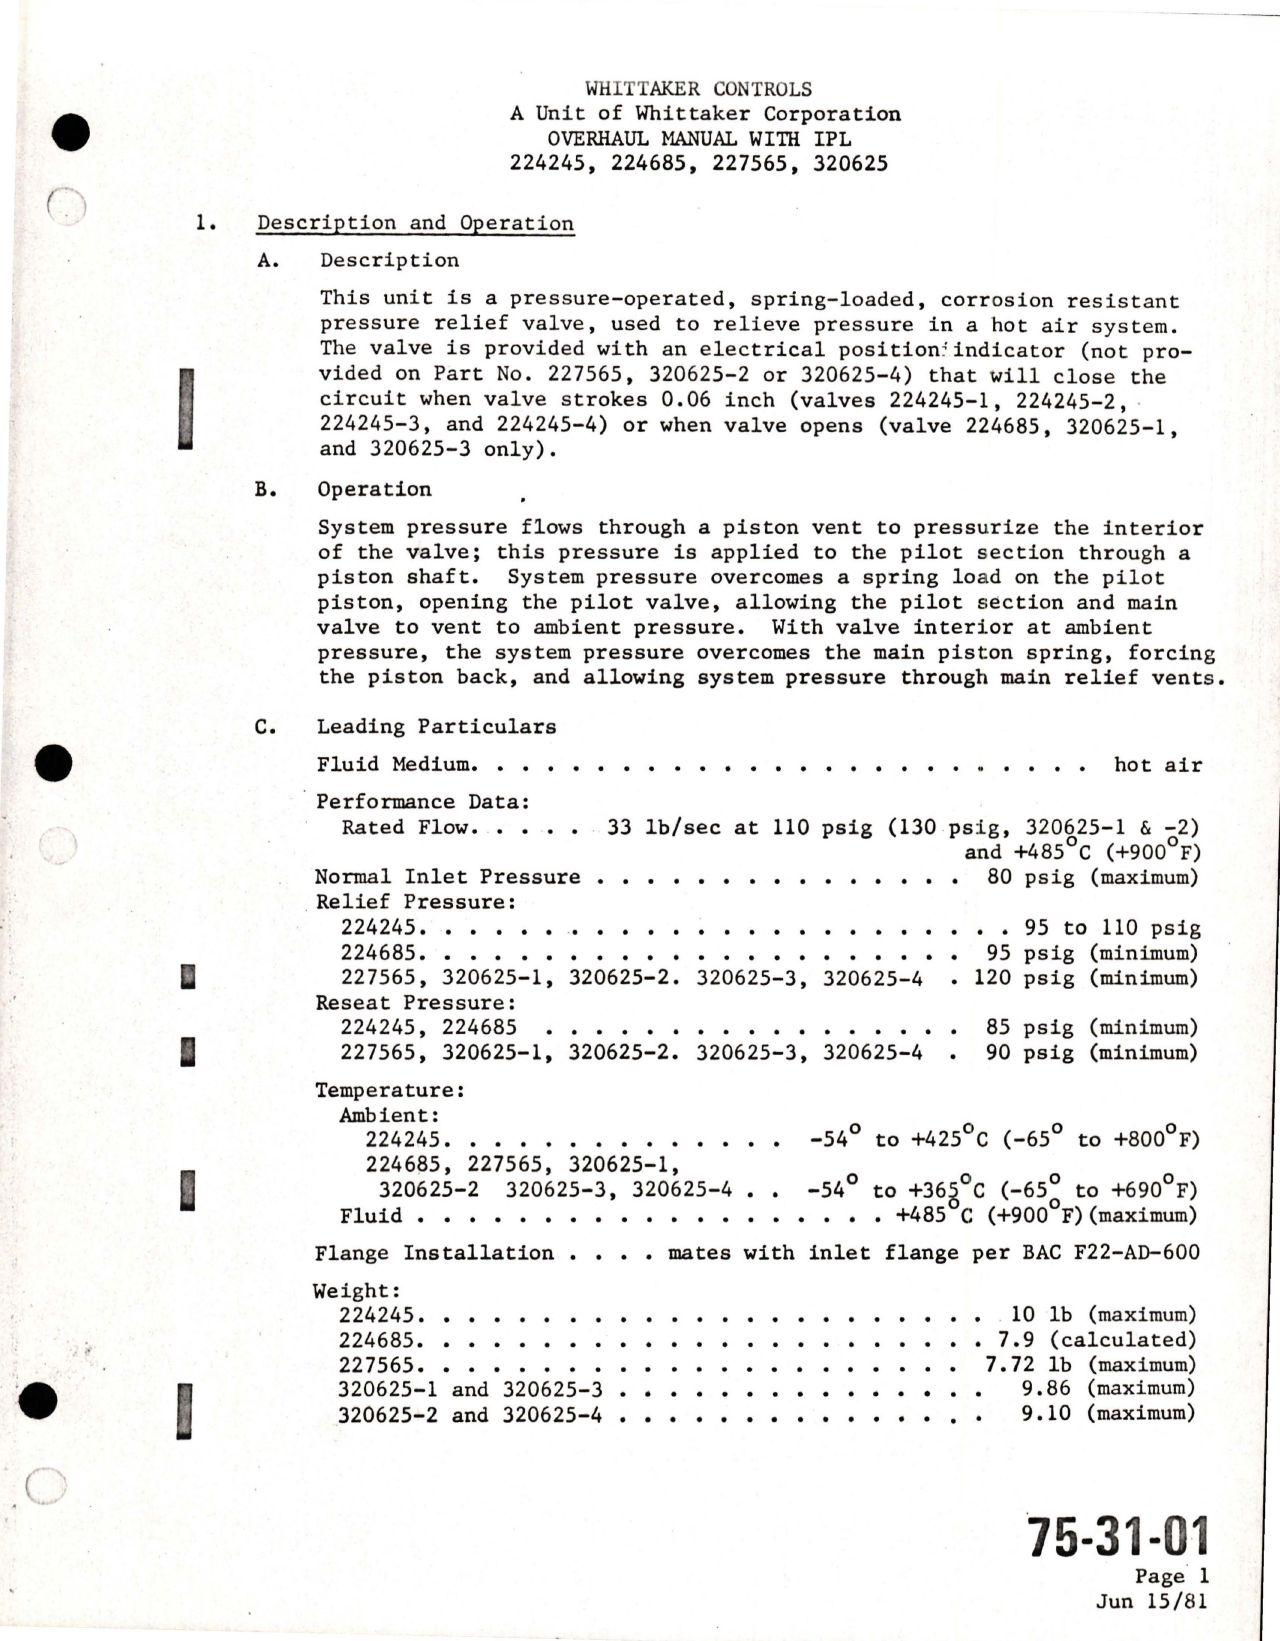 Sample page 7 from AirCorps Library document: Overhaul with Illustrated Parts List for Pressure Relief Valve - 6 inch tube size - Revision 7